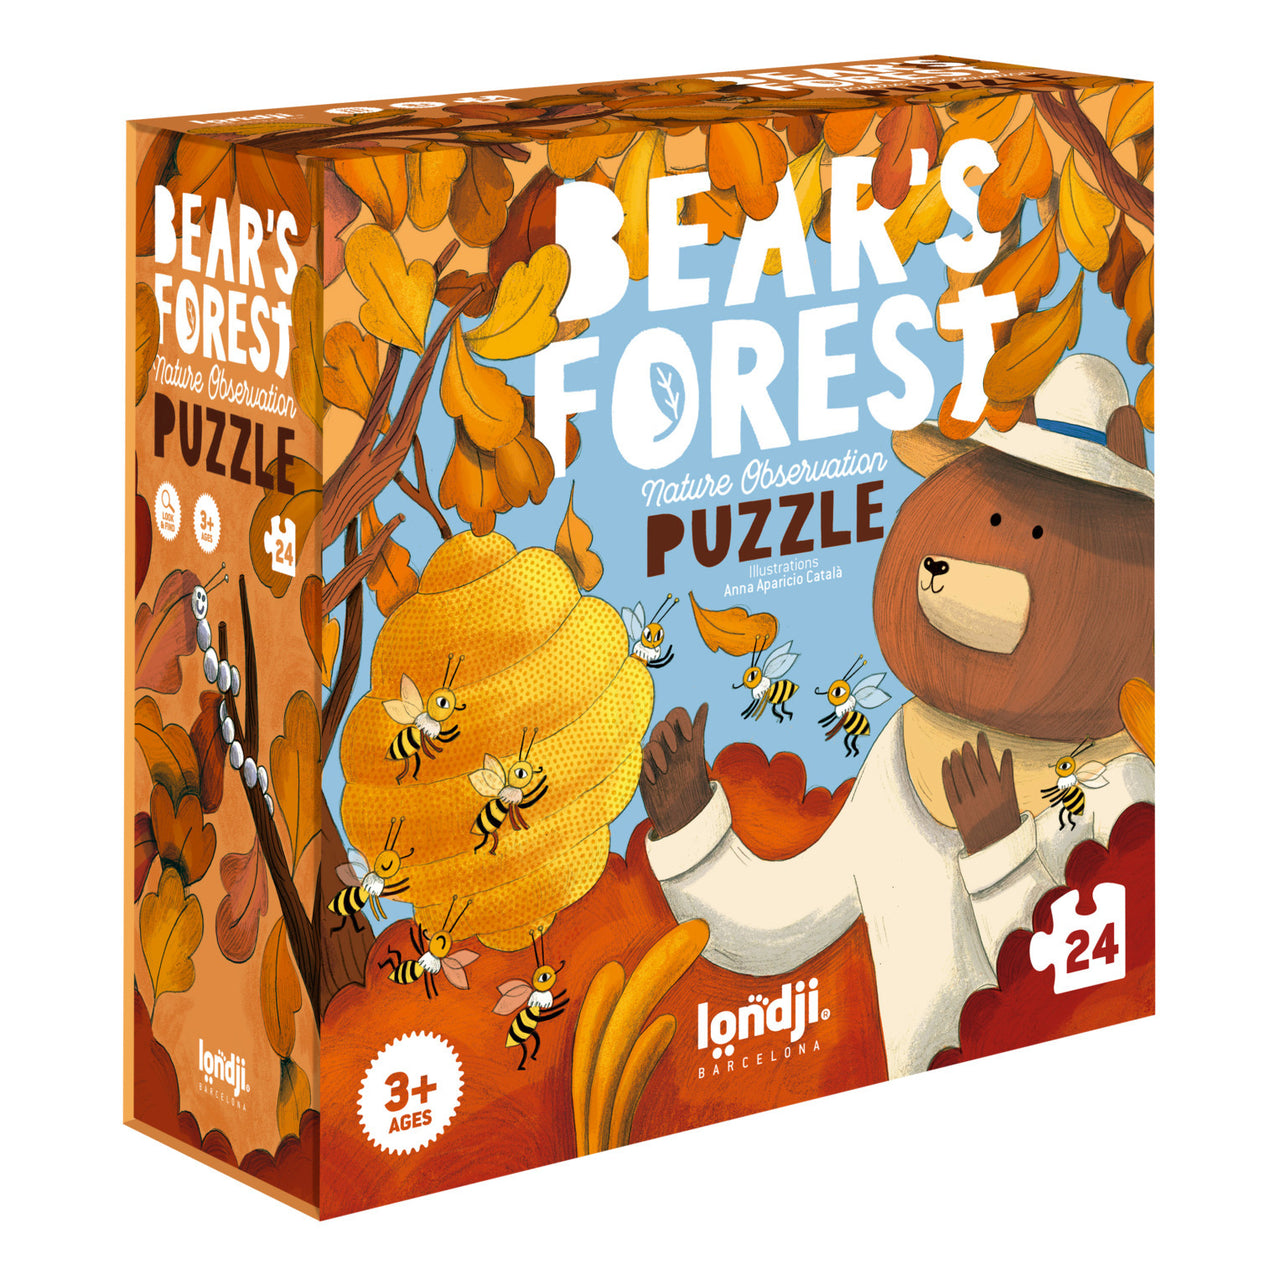 Bear’s Forest Puzzle 24 piece